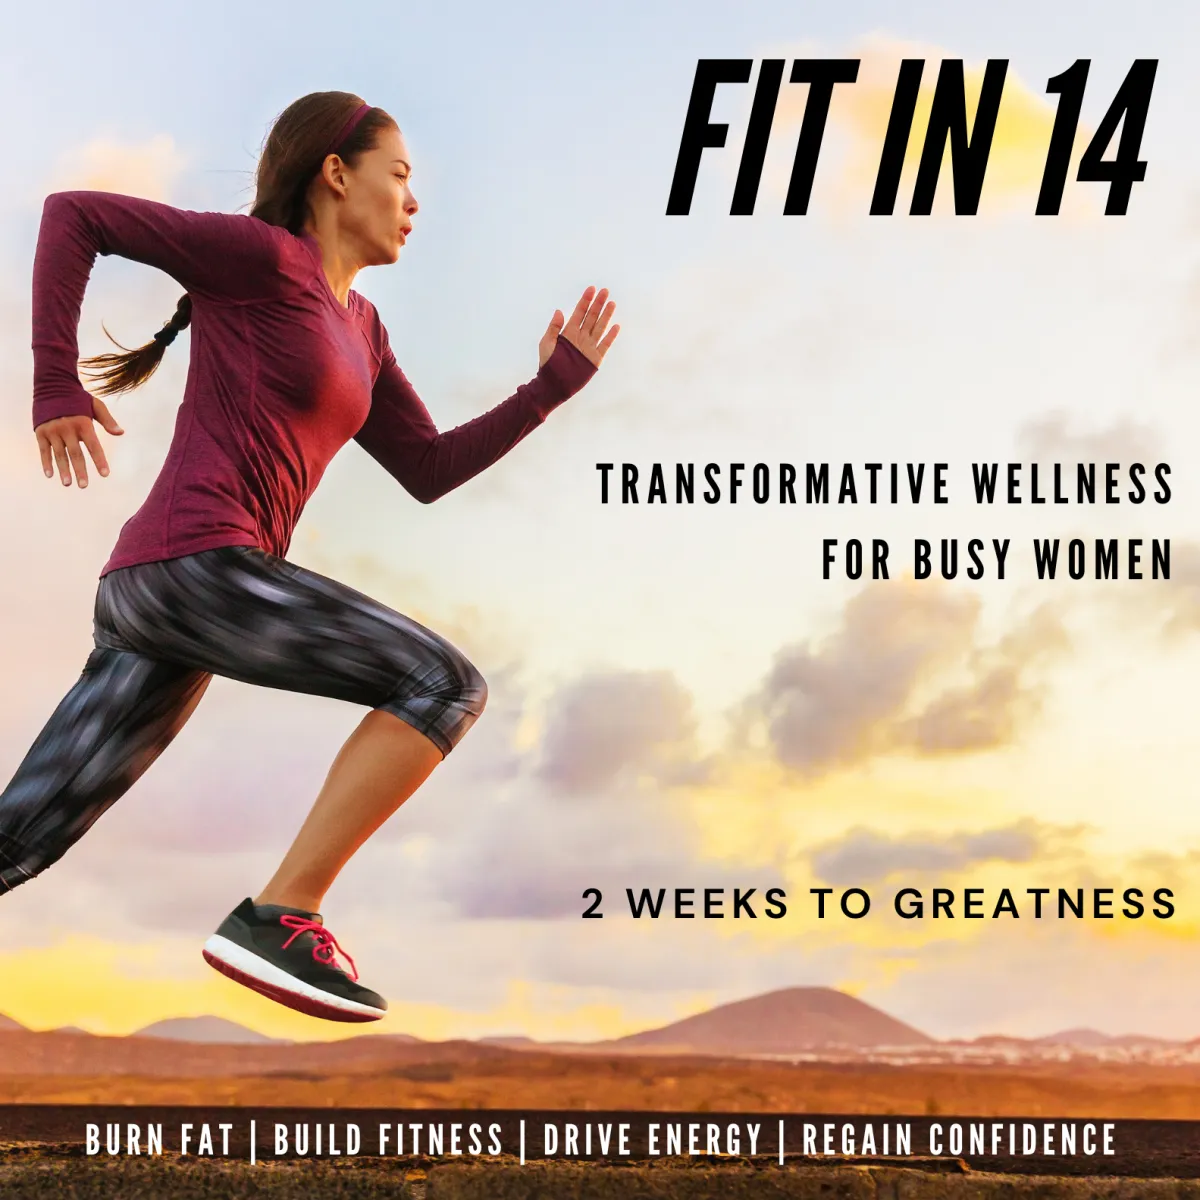 Fit in 14: Female Fitness Transformation Course 